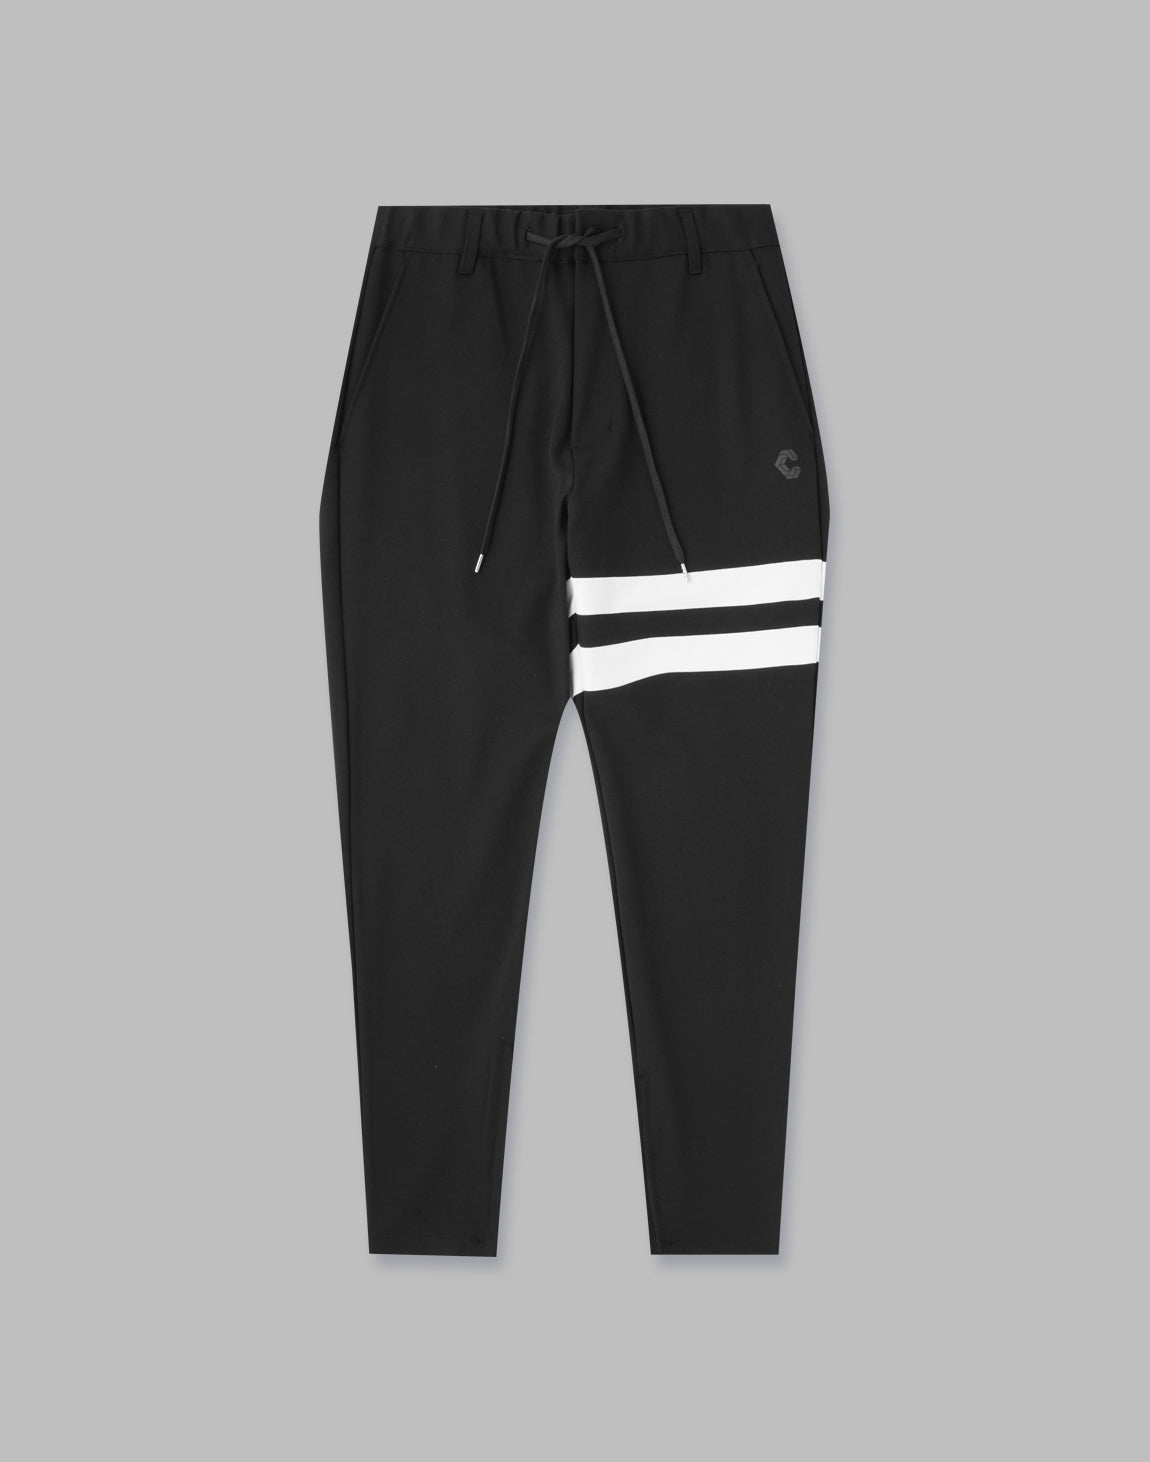 CRONOS BLACK SLIM TAPERED LING PANTS – クロノス CRONOS Official Store